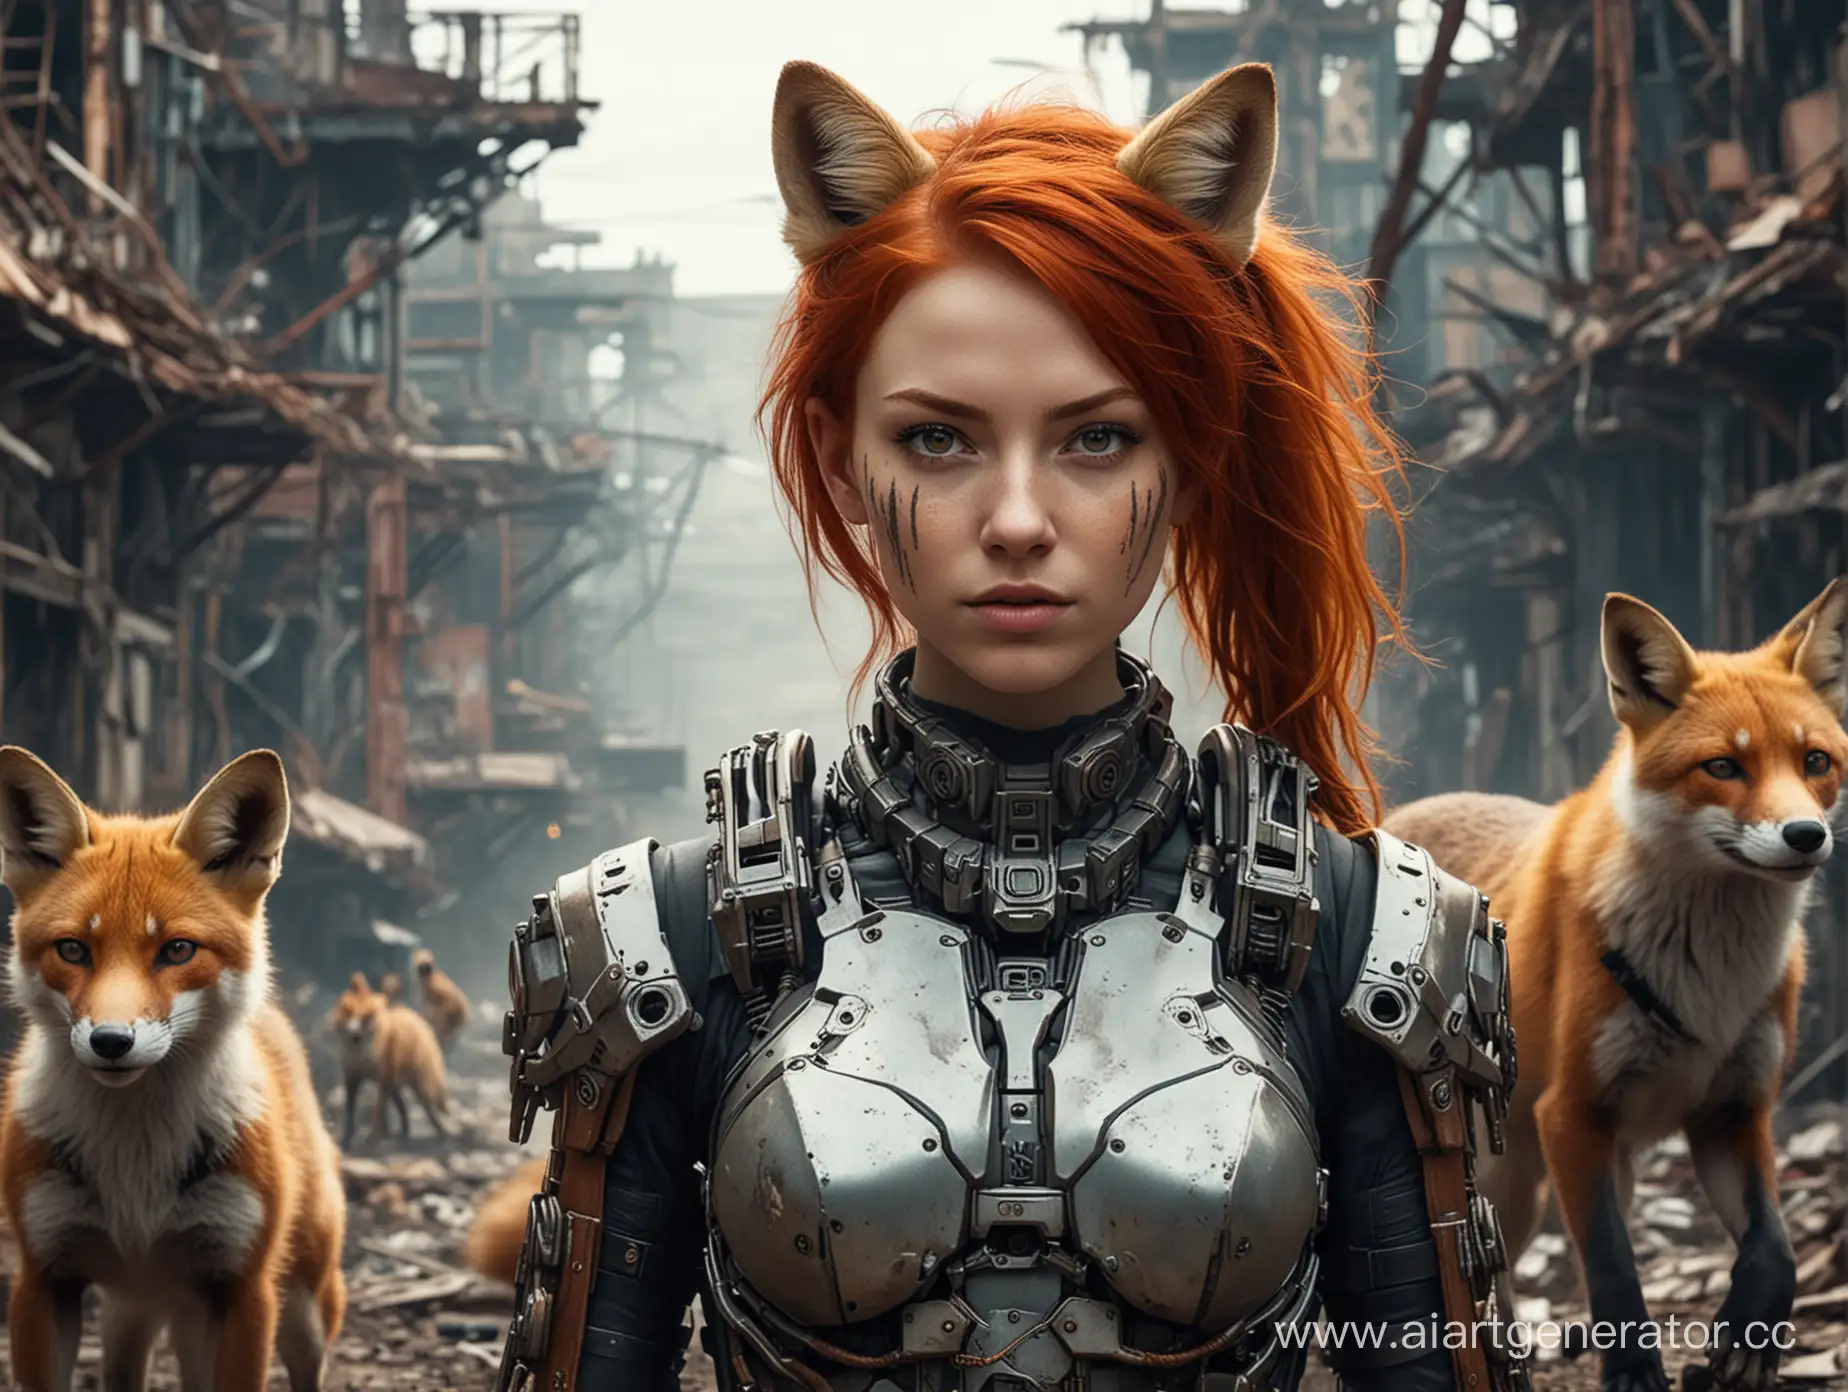 RedHaired-Cyborg-Girl-with-Foxes-in-PostApocalyptic-Setting